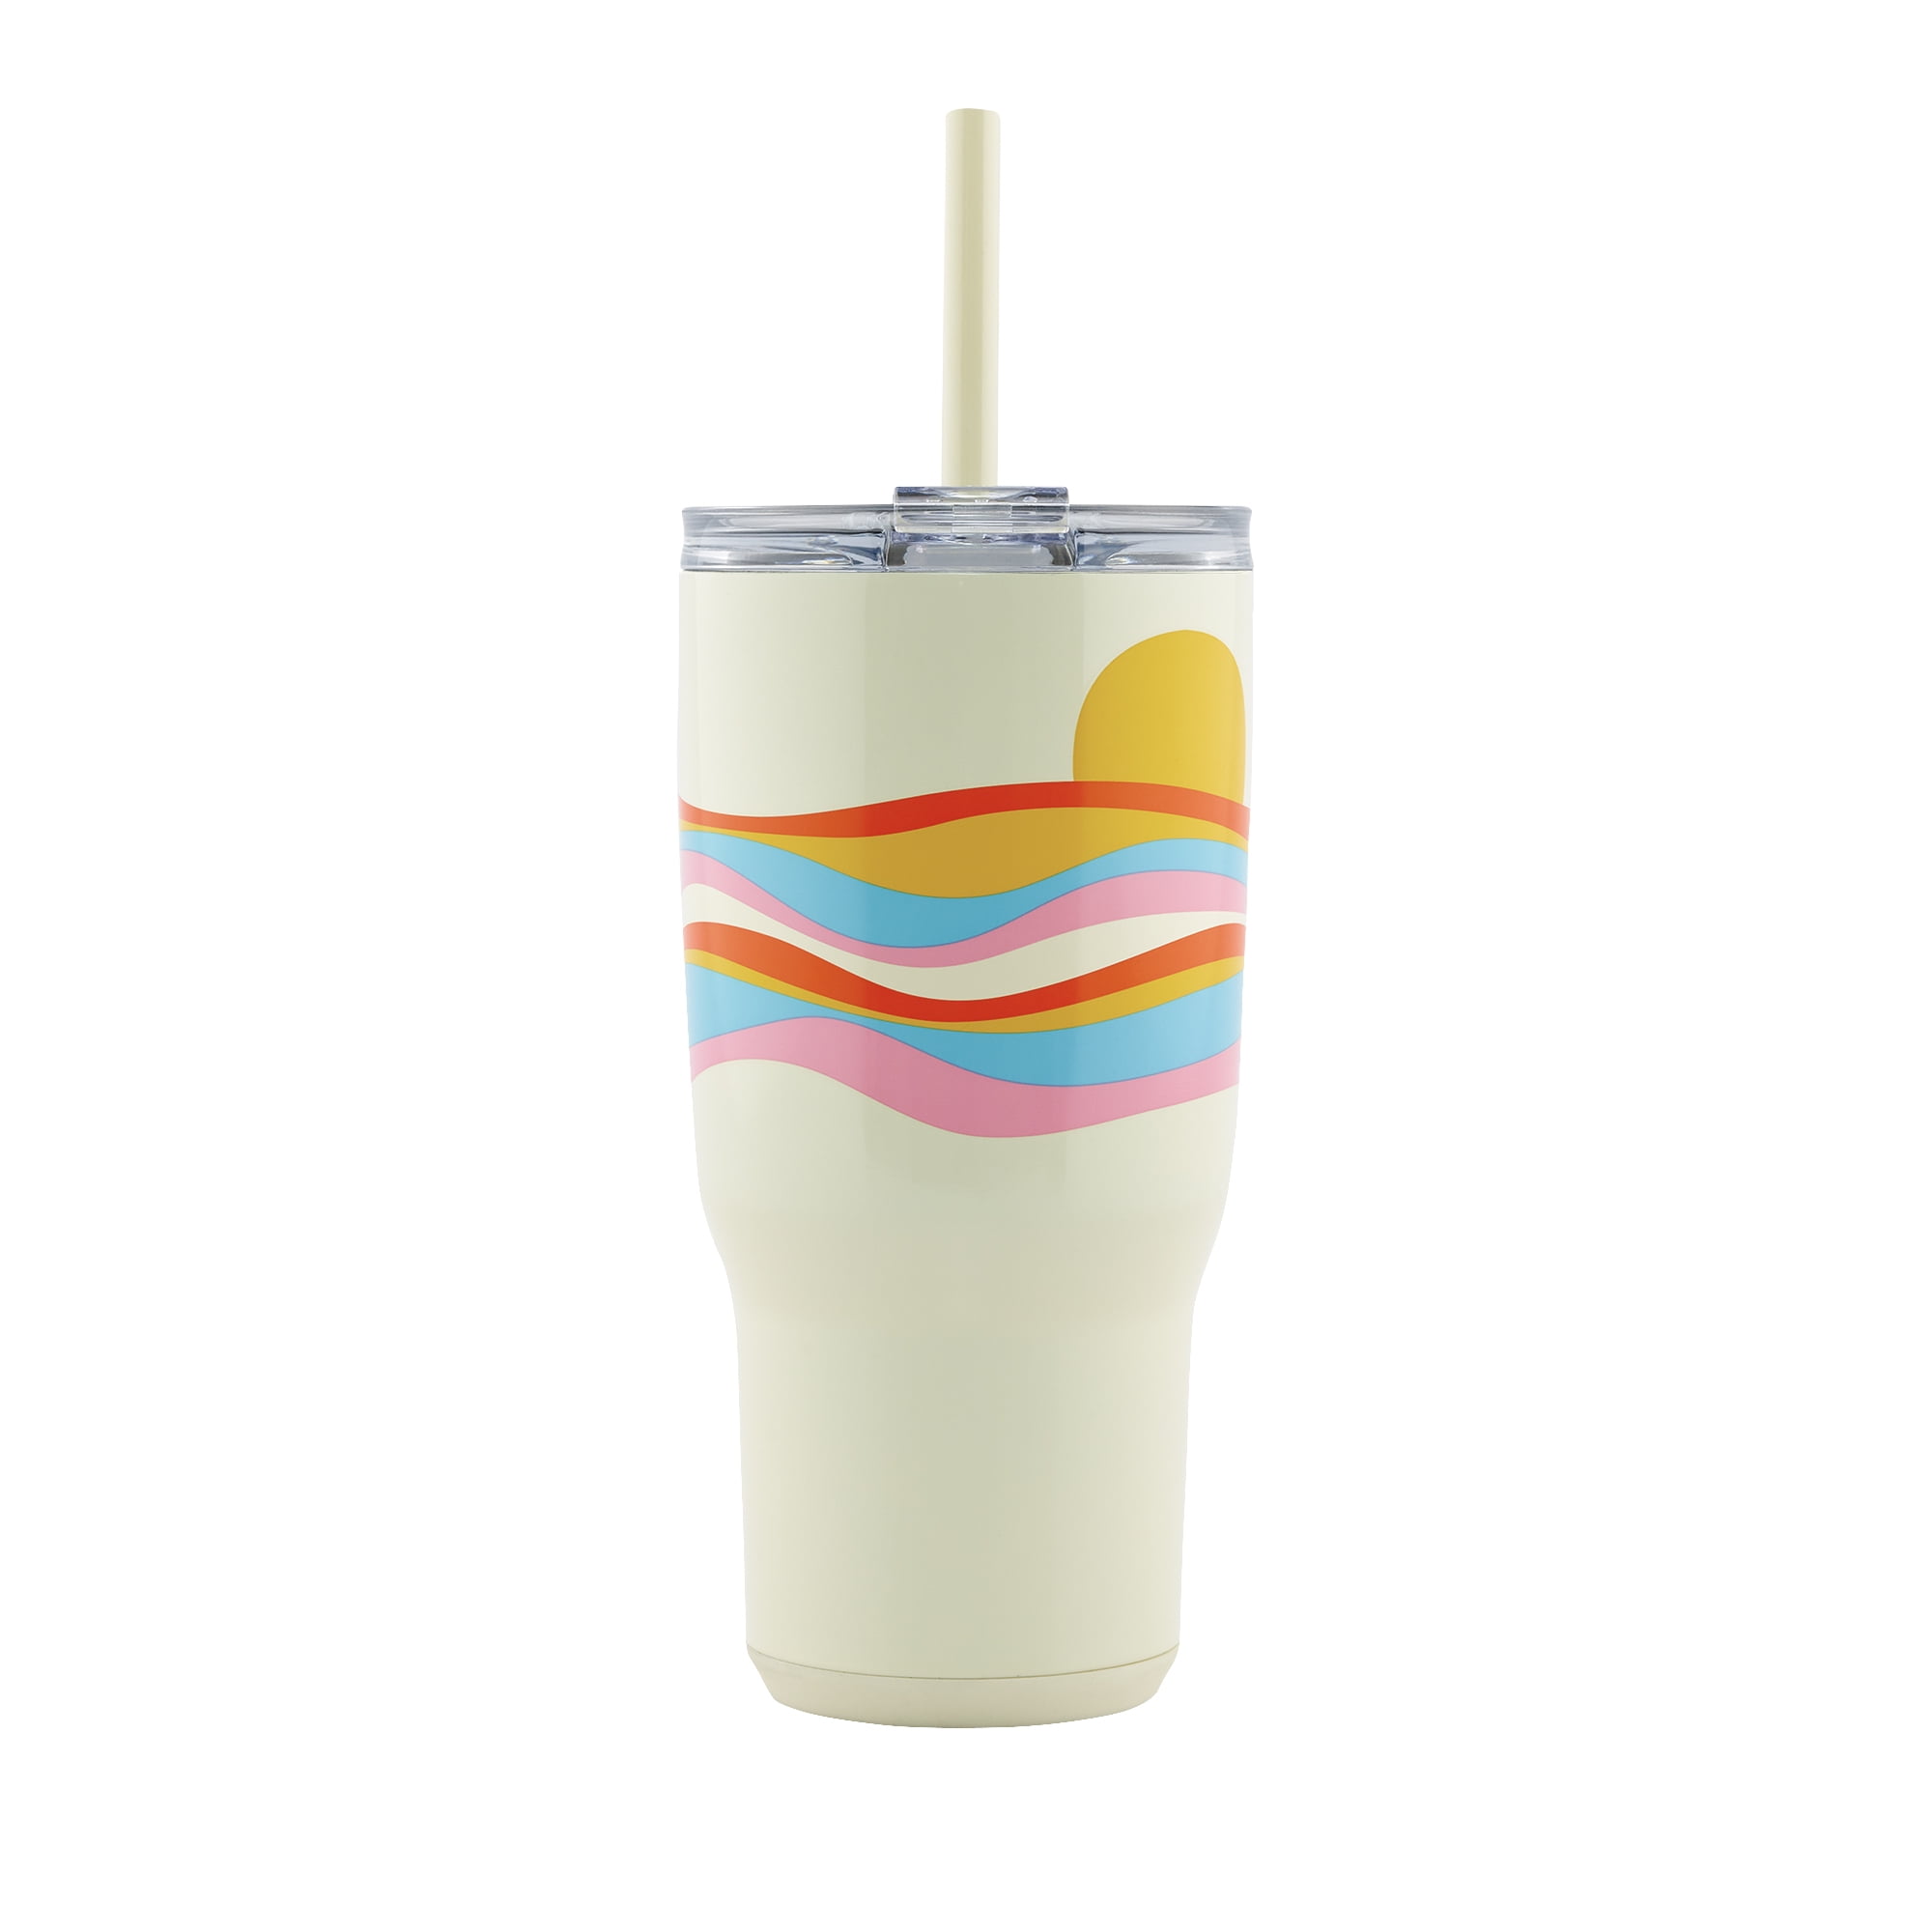 Reduce Cold-1 34 oz. Stainless Steel Travel Tumbler Cup w/ Straw 01526  (White)